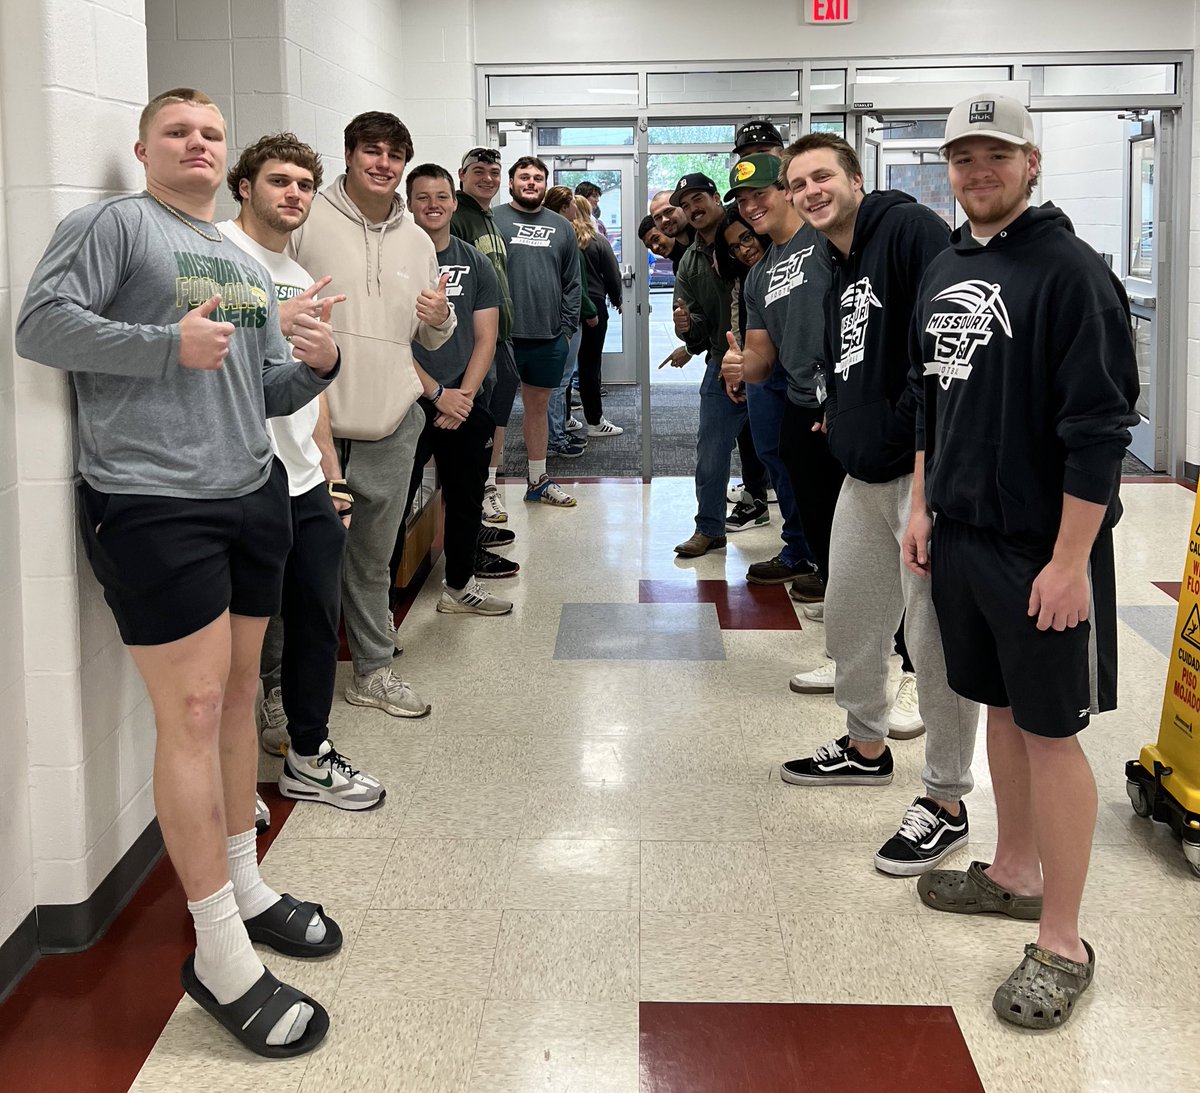 Had a great time at Truman Elementary eating breakfast with some future Miners this morning! ⛏️ #PickAxeTakeNames | #MinerPride